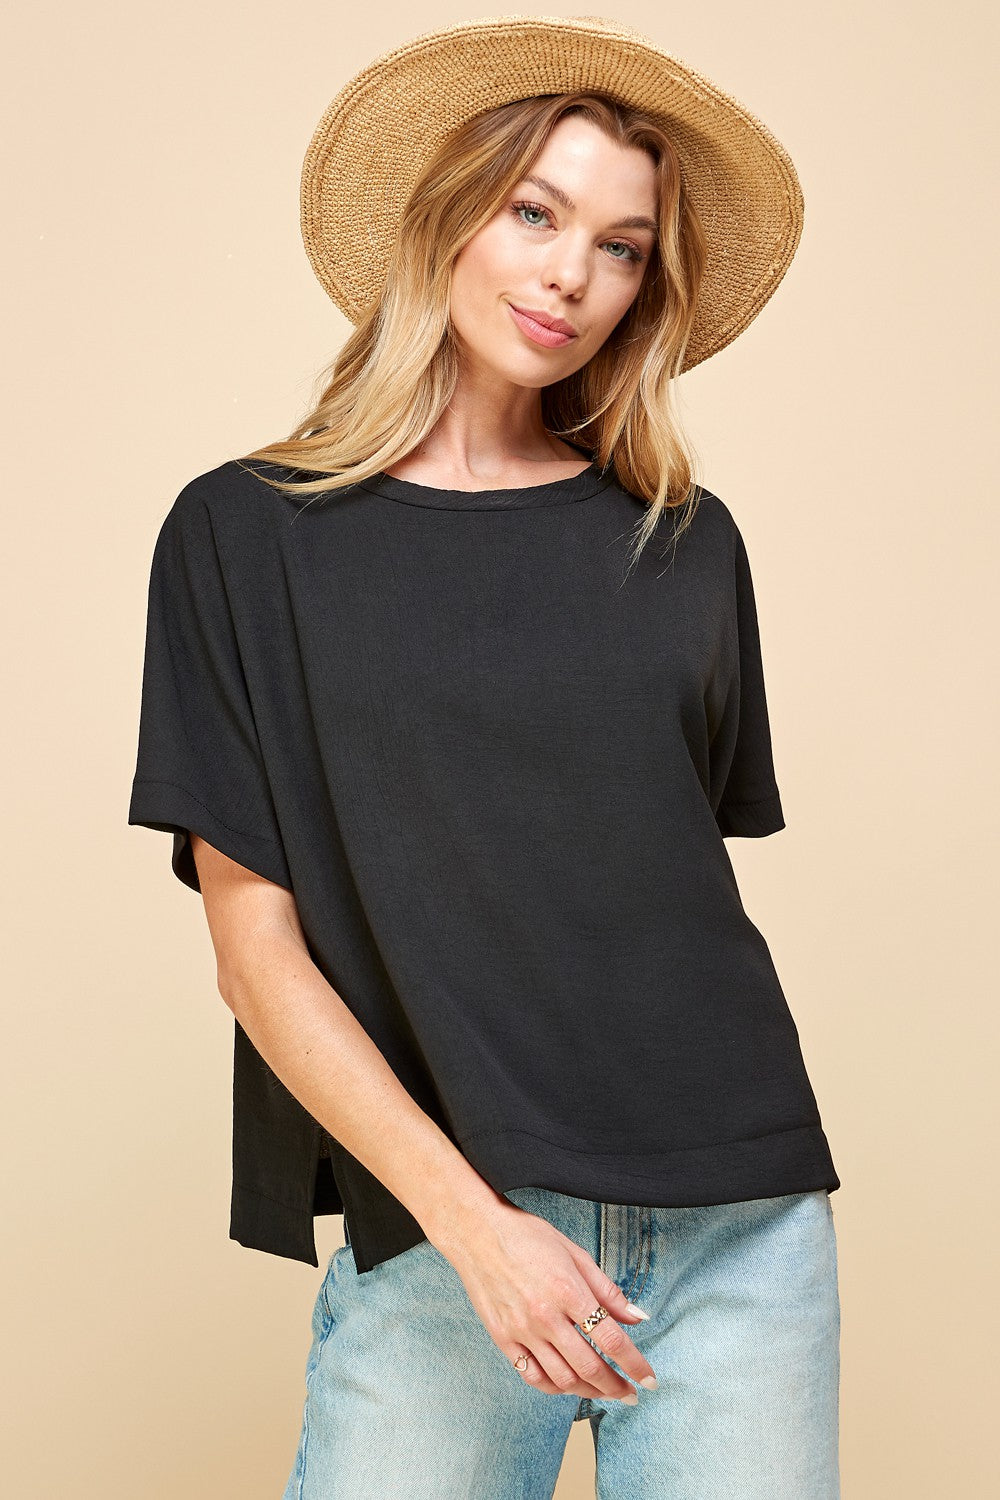 Simply Perfect Top